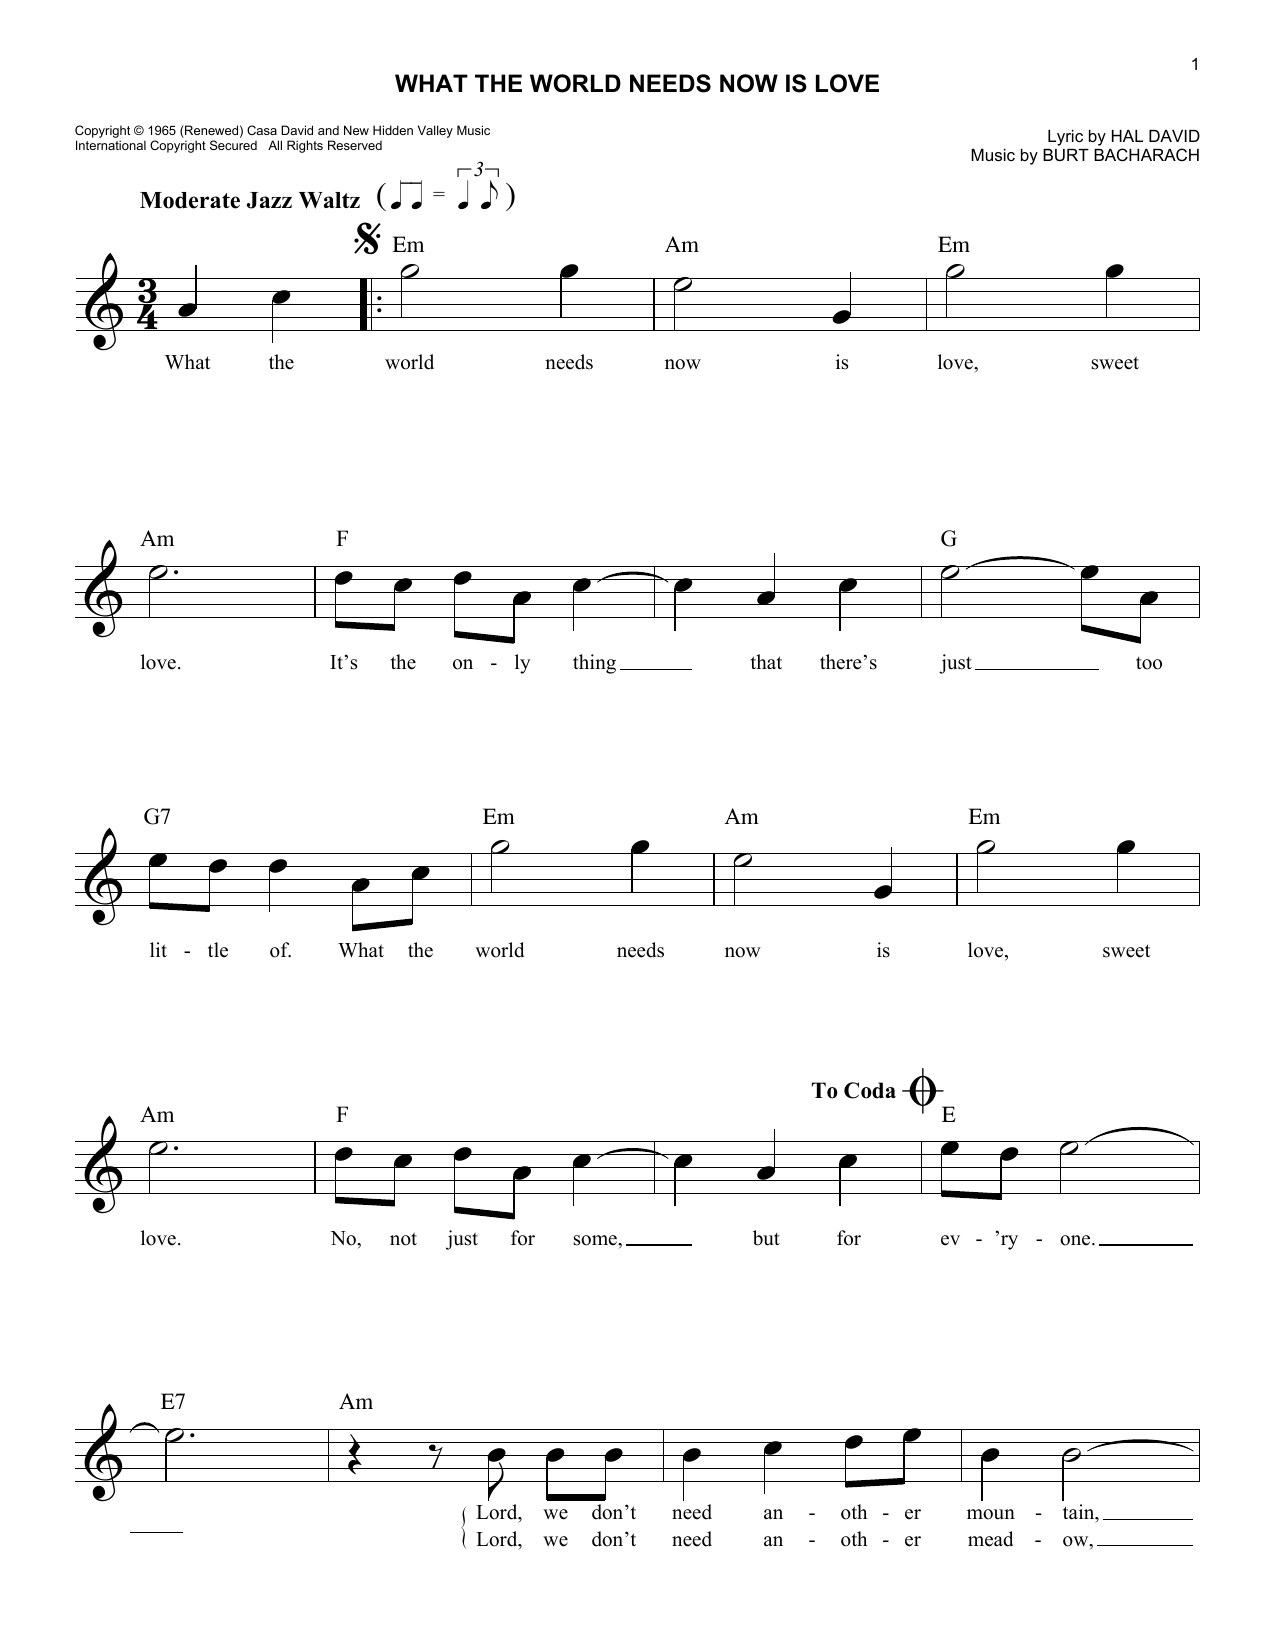 Bacharach & David What The World Needs Now Is Love sheet music notes and chords. Download Printable PDF.